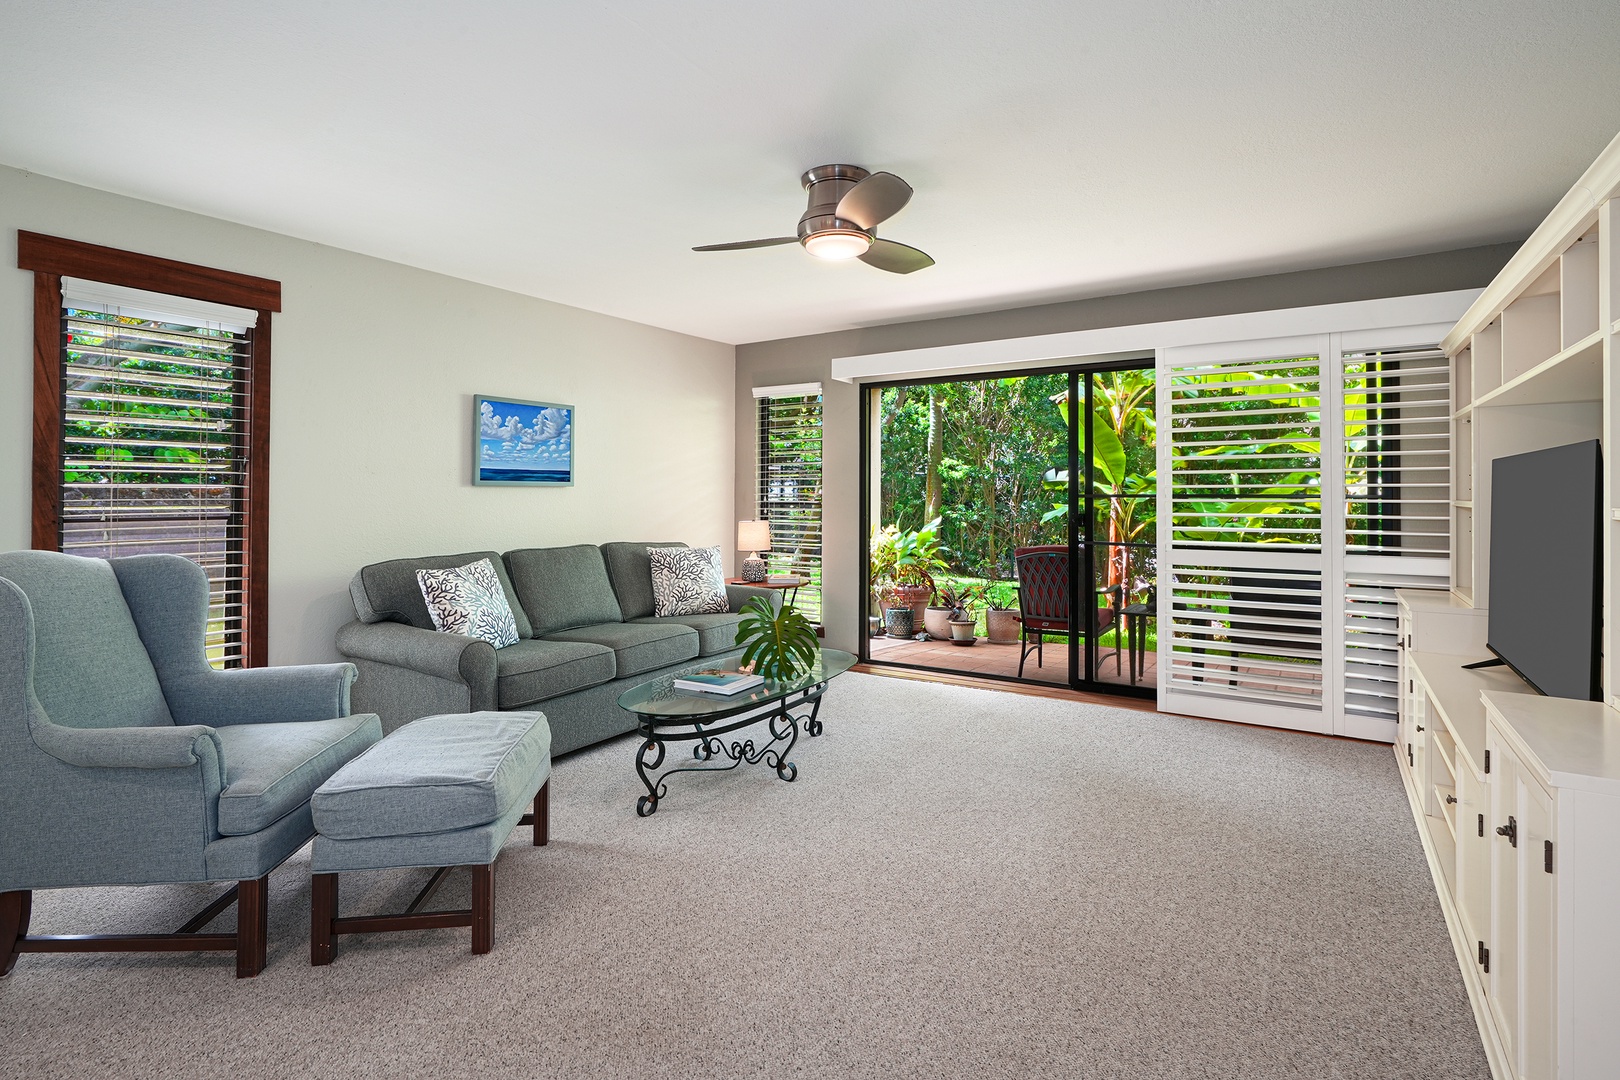 Koloa Vacation Rentals, Waikomo Streams 203 - Welcome to the inviting ambiance of the living area, where comfort and style merge to create a relaxing space